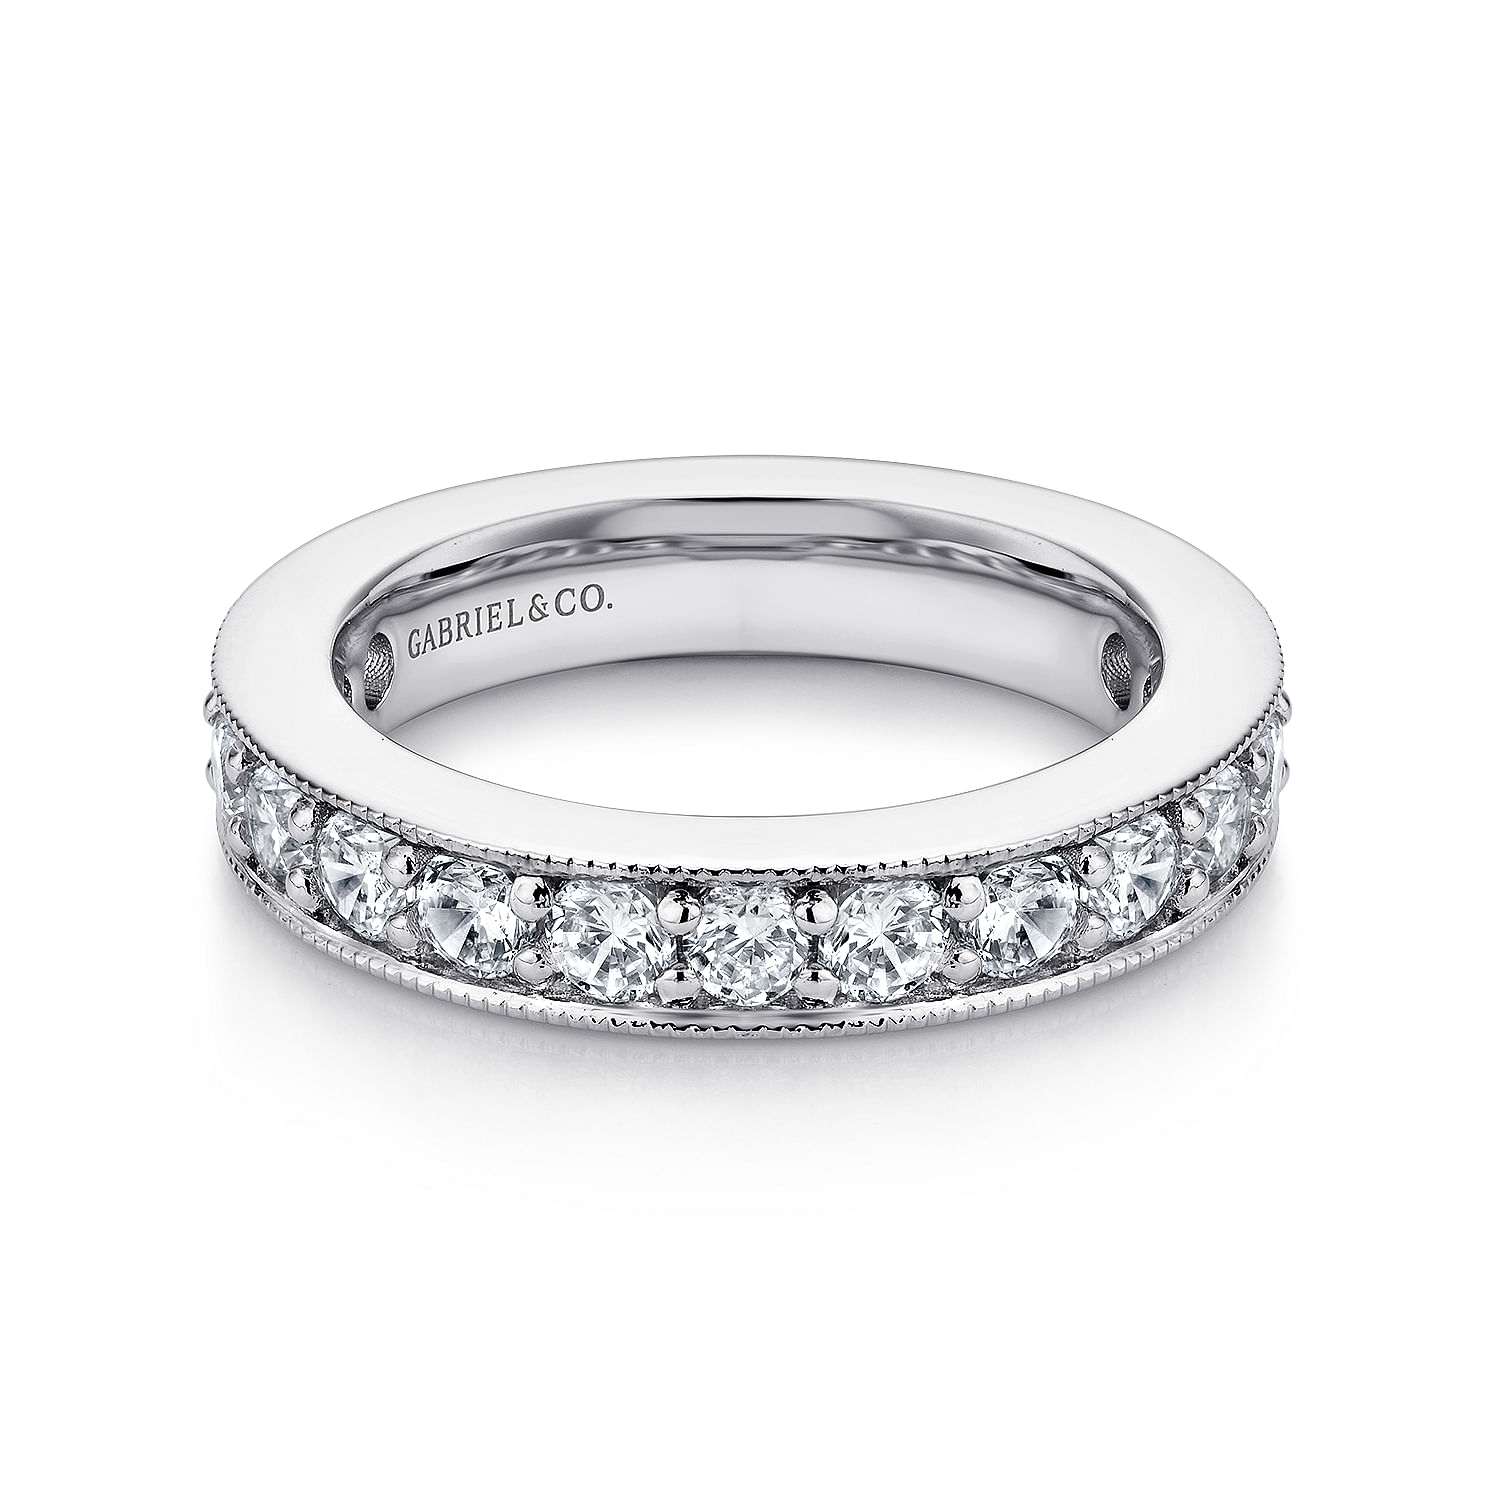 Calabria - 14K White Gold Channel Prong Set Diamond Eternity Band